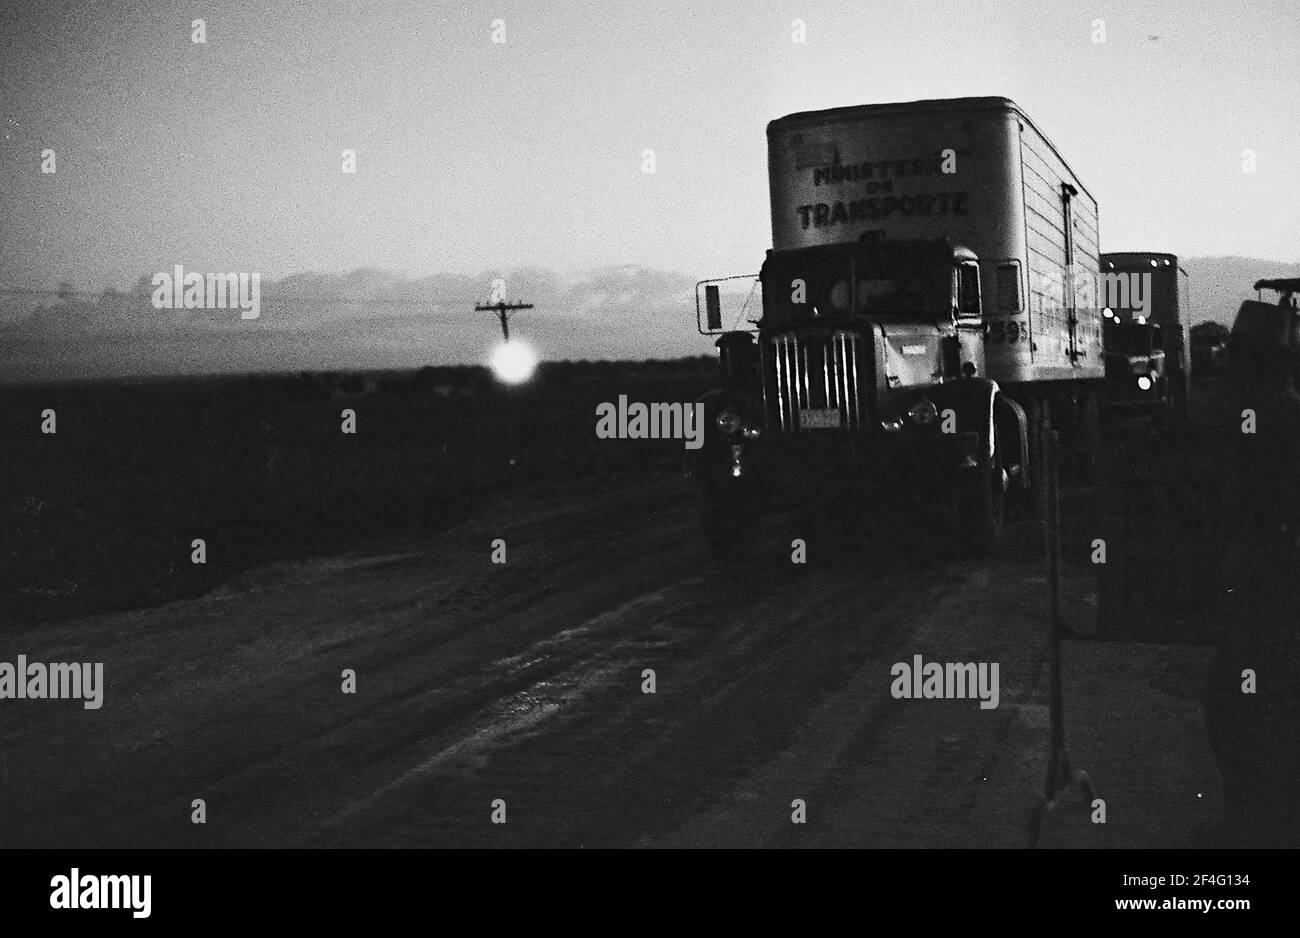 A semi truck drives down a dark road in Cuba, Holguin province, 1963. From the Deena Stryker photographs collection. () Stock Photo